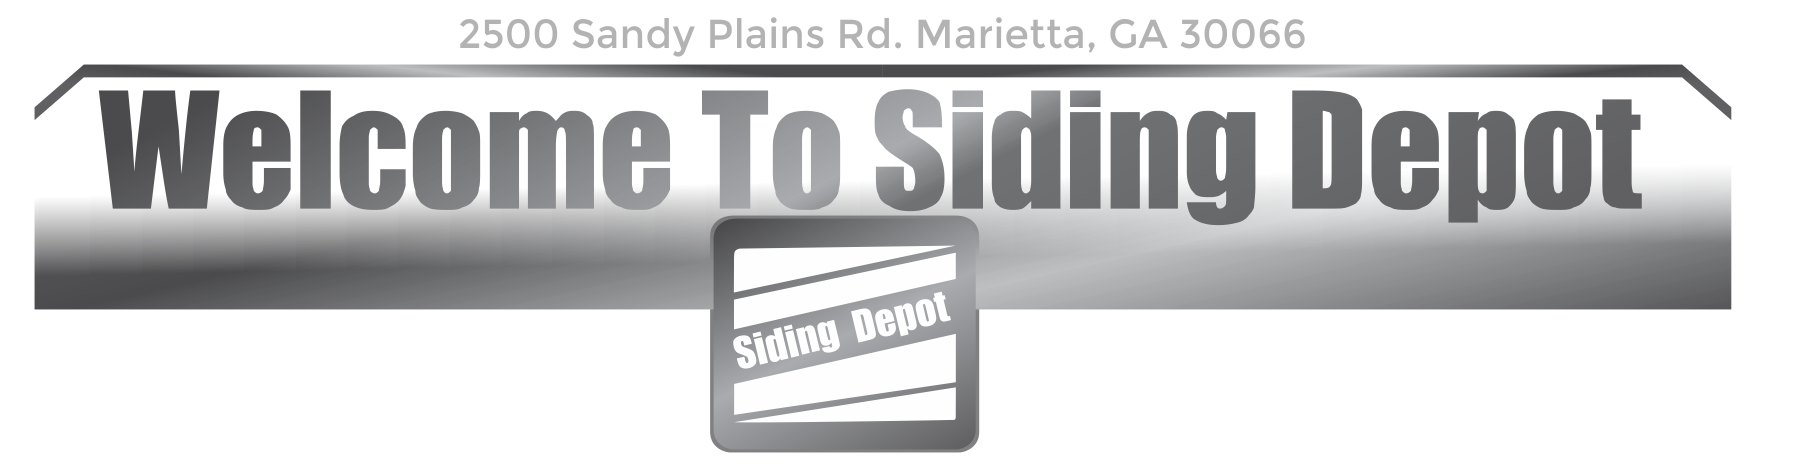 Welcome To Siding Depot